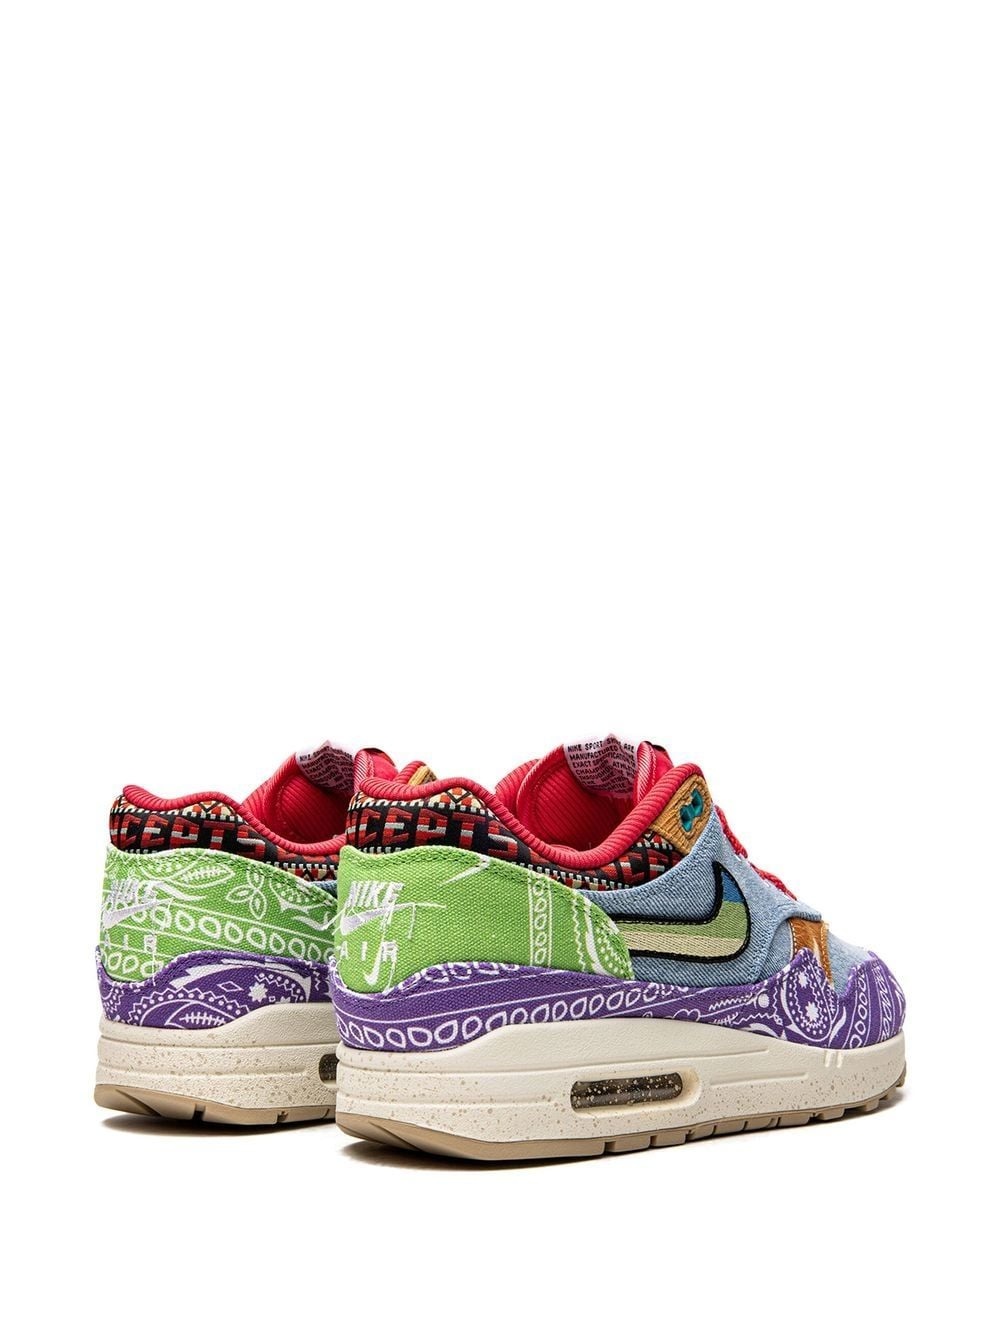 x Concepts Air Max 1 SP "Wild Violet - Special Box" sneakers - 3